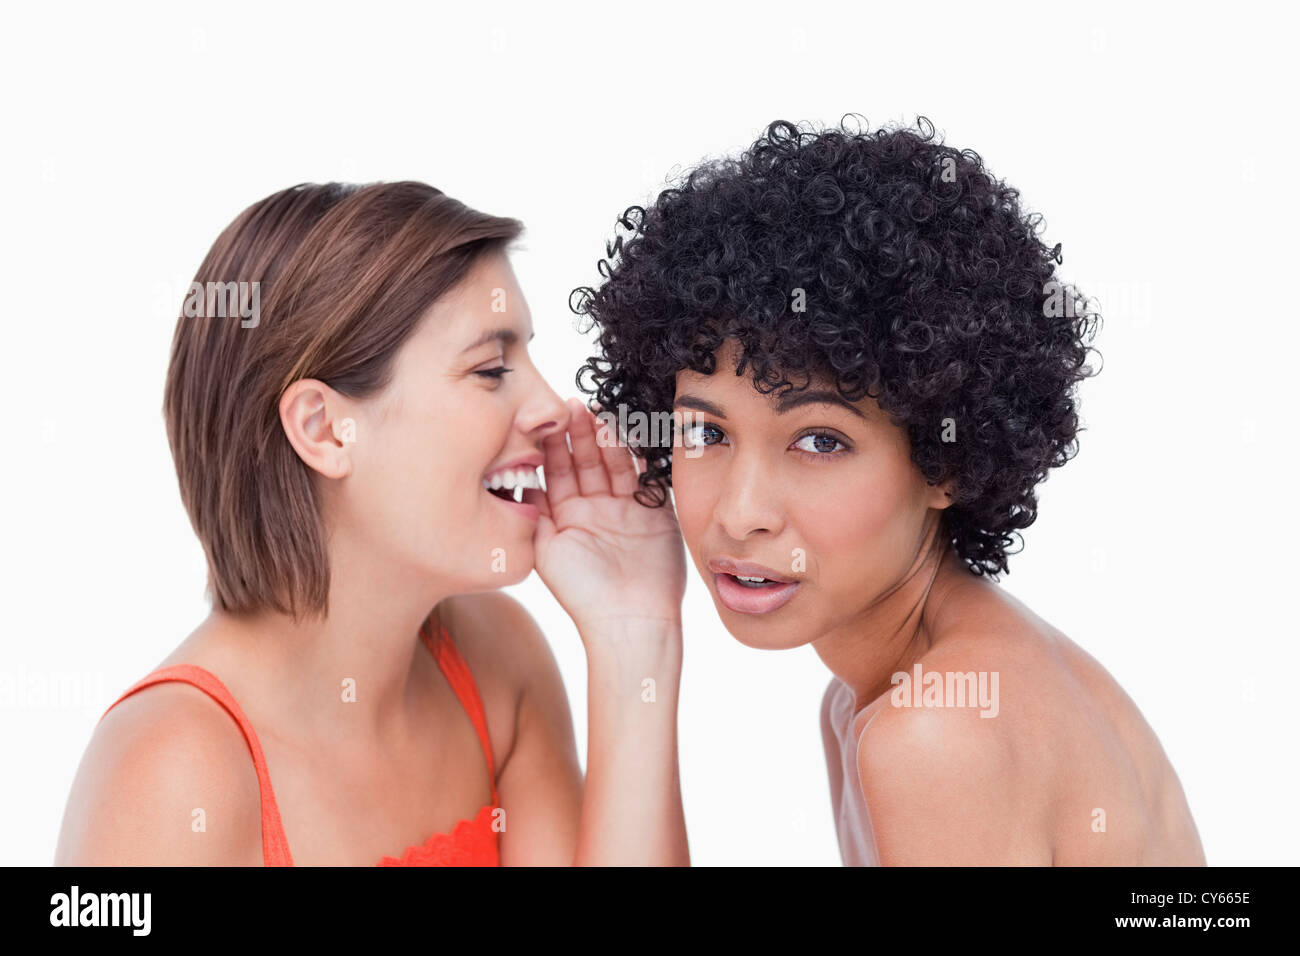 Teenage girl being told a secret by a friend Stock Photo